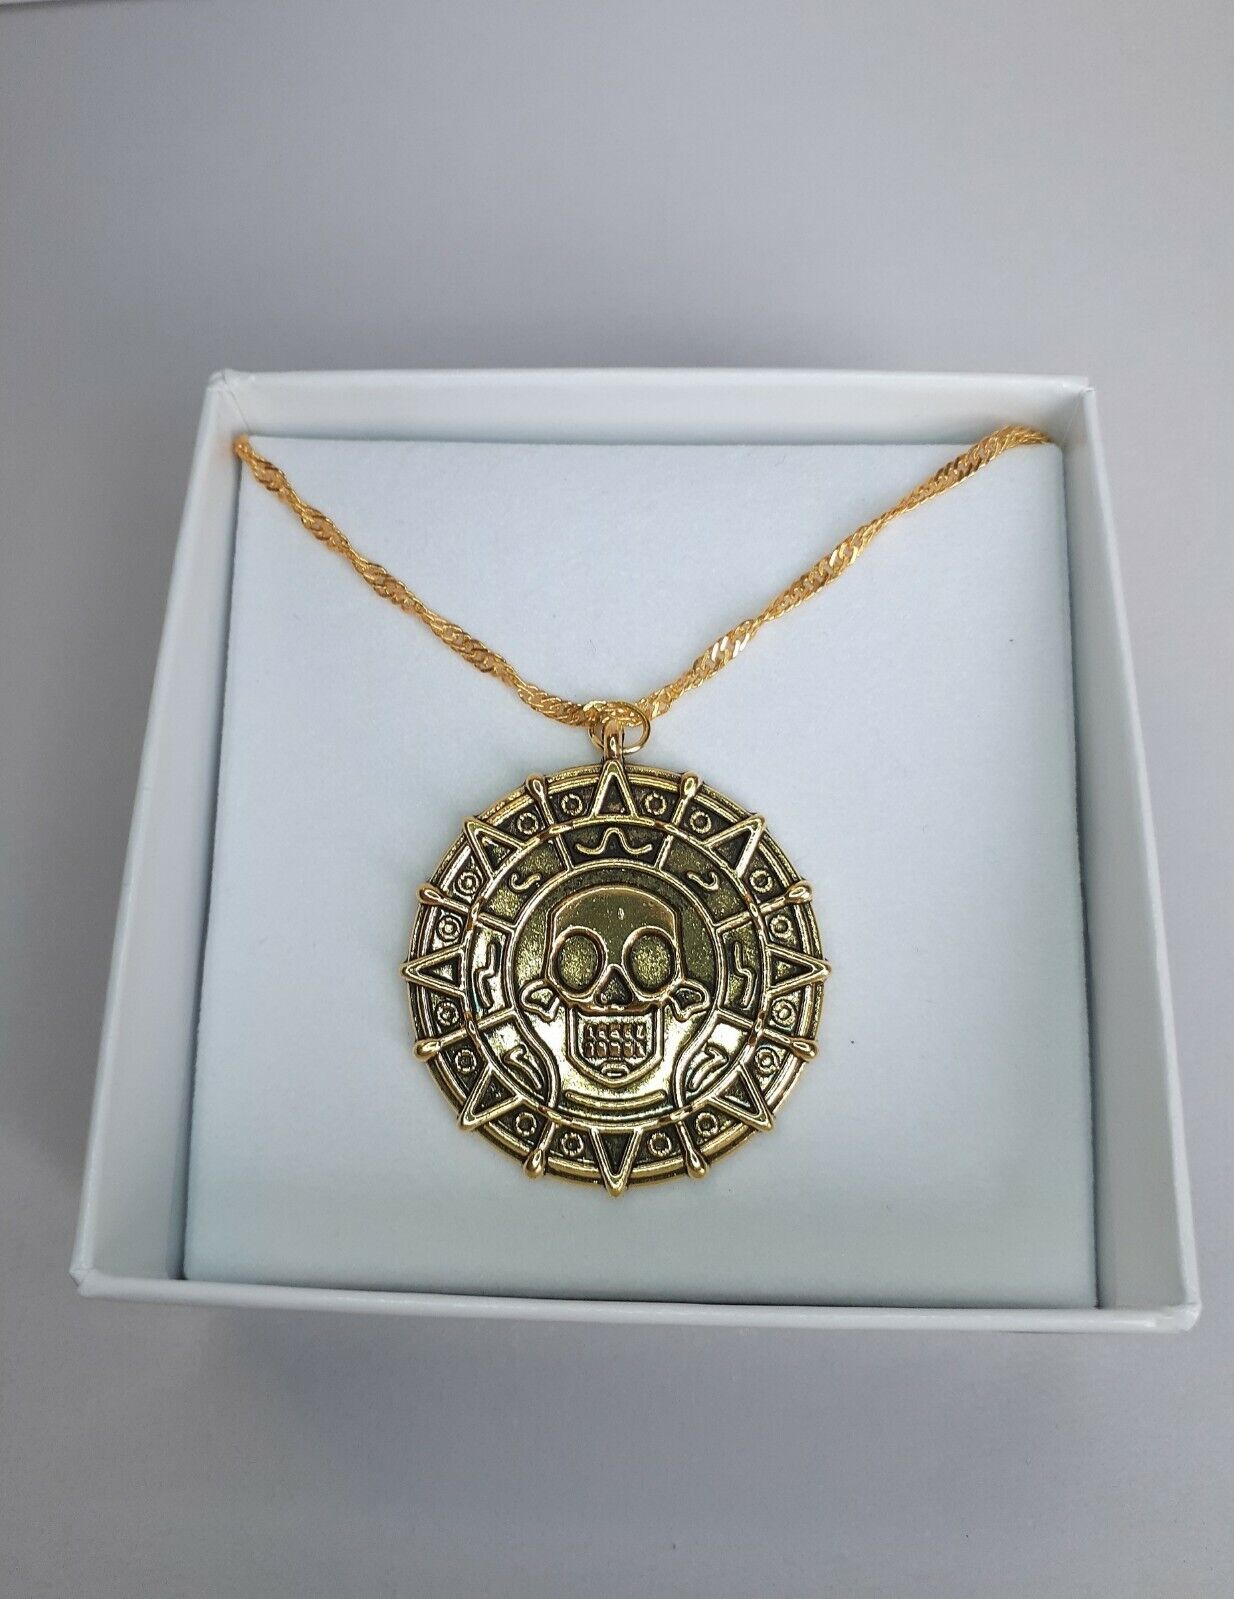 Pirates of the Caribbean? Well this necklace is certainly from the film so  I hope Captain Jack is going to come to the valley! : r/DreamlightValley